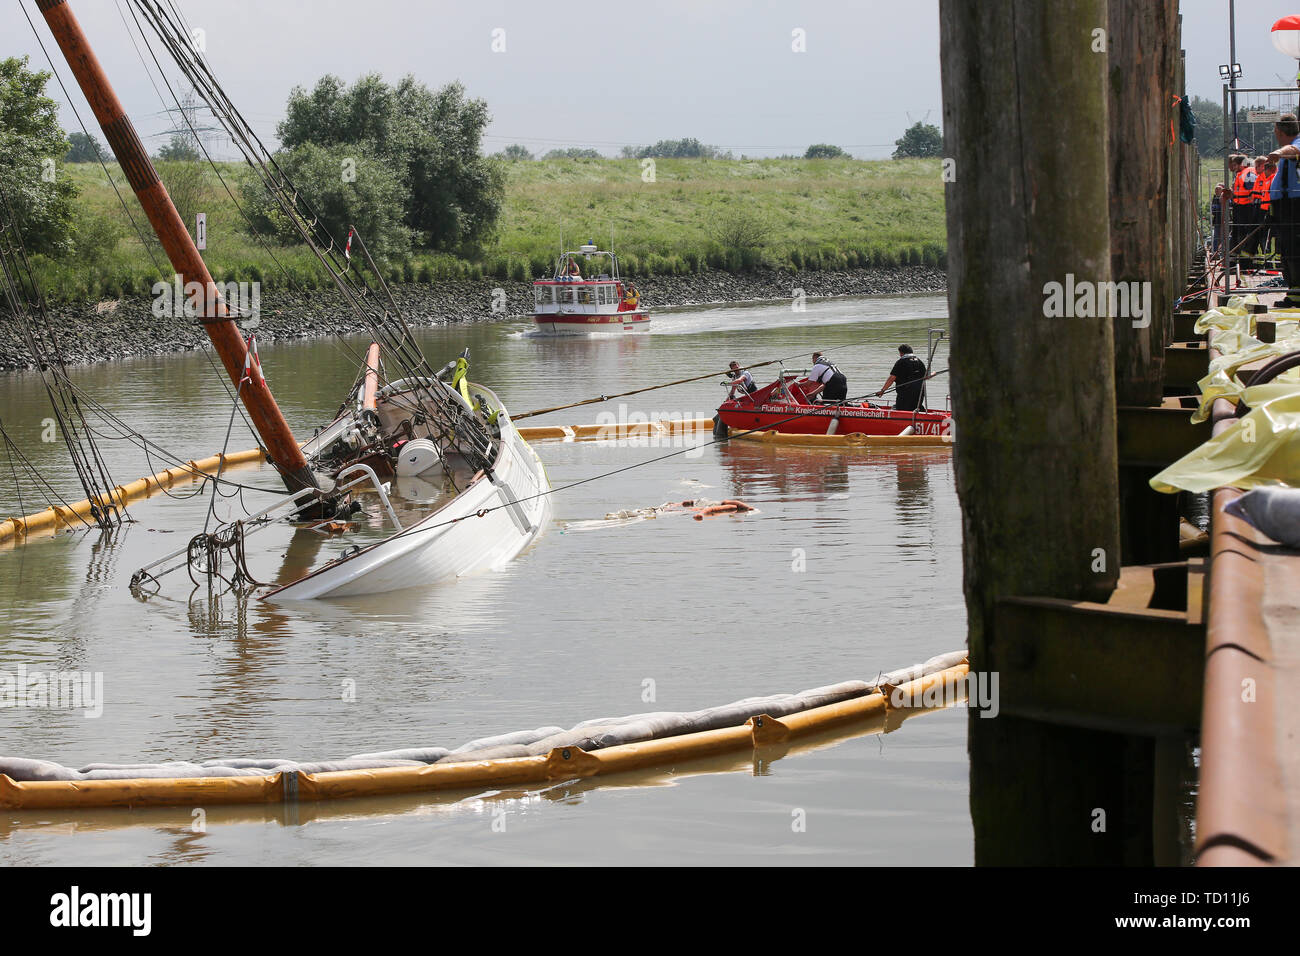 Stadersand, Germany. 11th June, 2019. Emergency forces are preparing the laying of new oil barriers around the sunken historic sailing ship 'No 5 Elbe' in the harbour of Stadersand. Operating fluids had leaked from the hull of the sailing ship, and the fire brigade was on site with the support of the German Federal Agency for Technical Relief and the German Aerospace Center (DLRG). The historic sailing ship, which has only recently been extensively renovated, collided with a container ship on the Elbe and sank. Credit: Bodo Marks/dpa/Alamy Live News Stock Photo